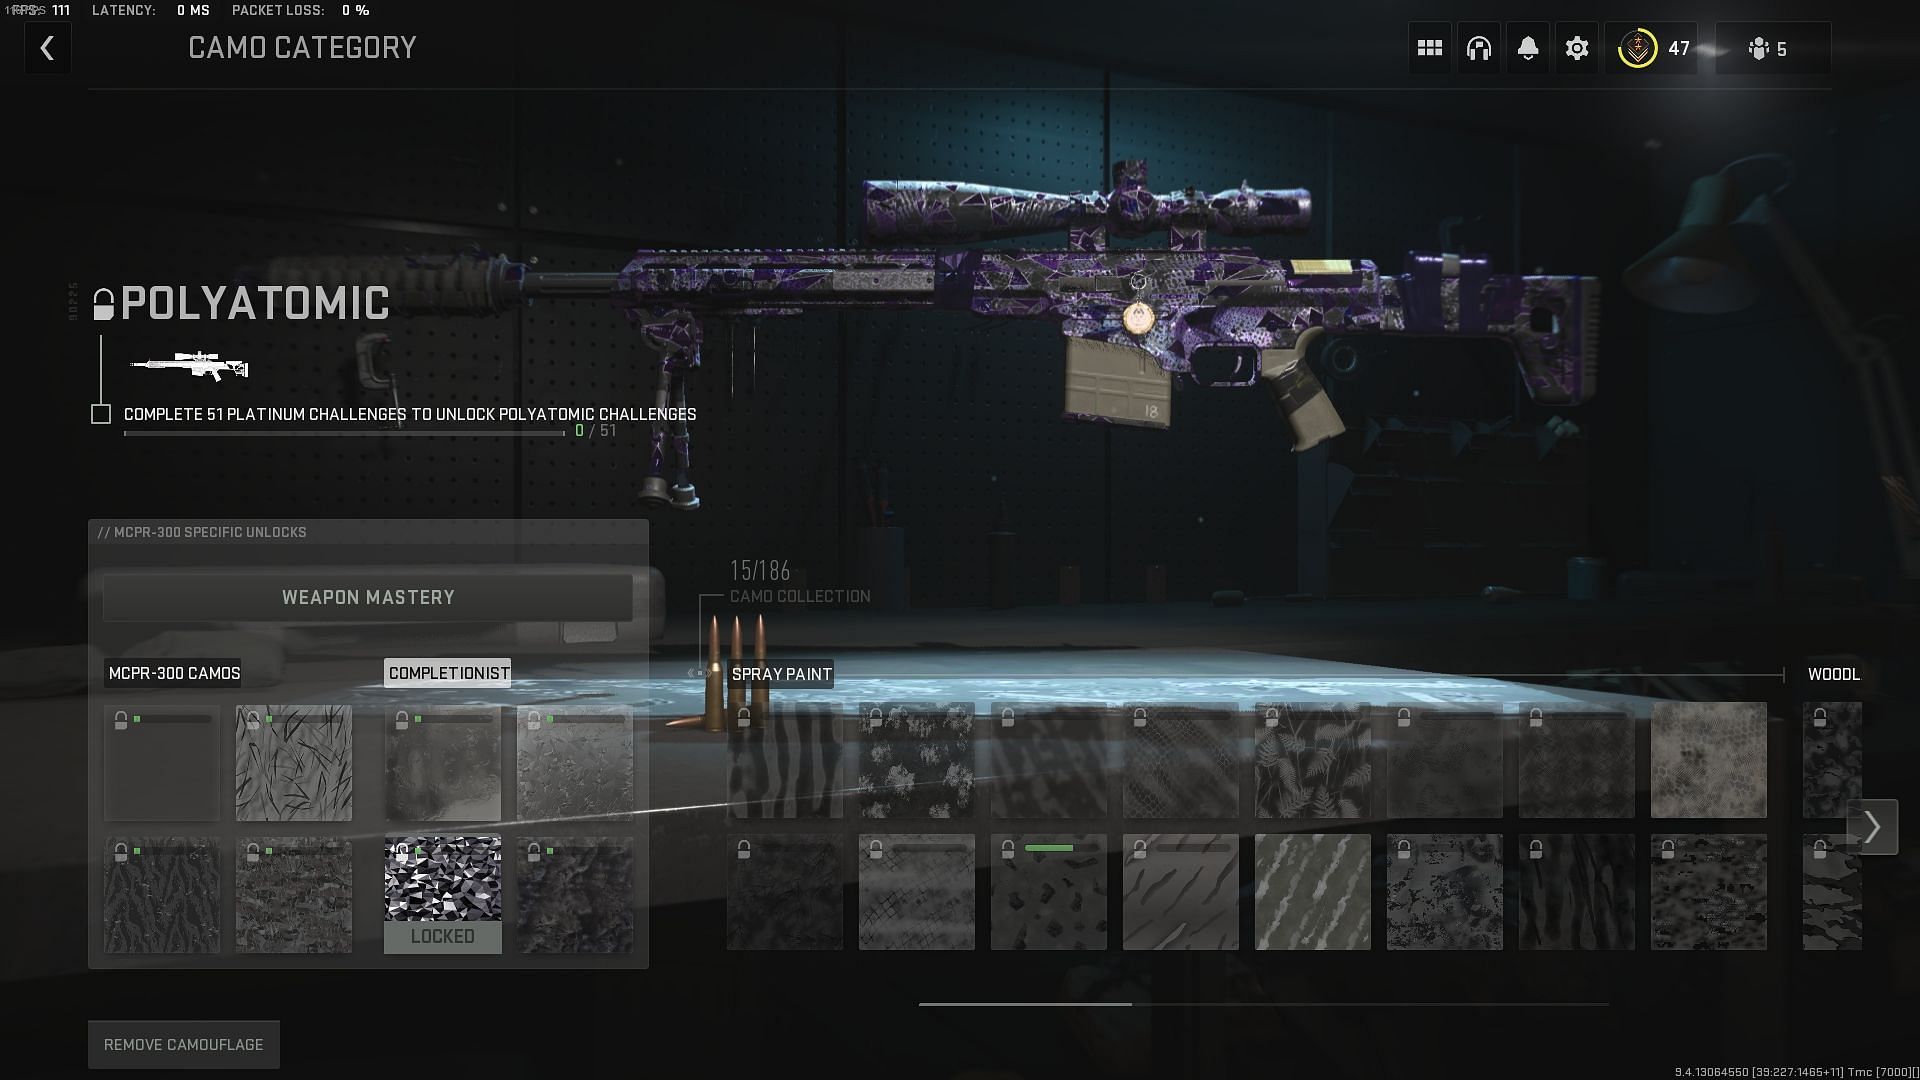 The MCPR-300 with the Polyatomic camo (image via Activision)